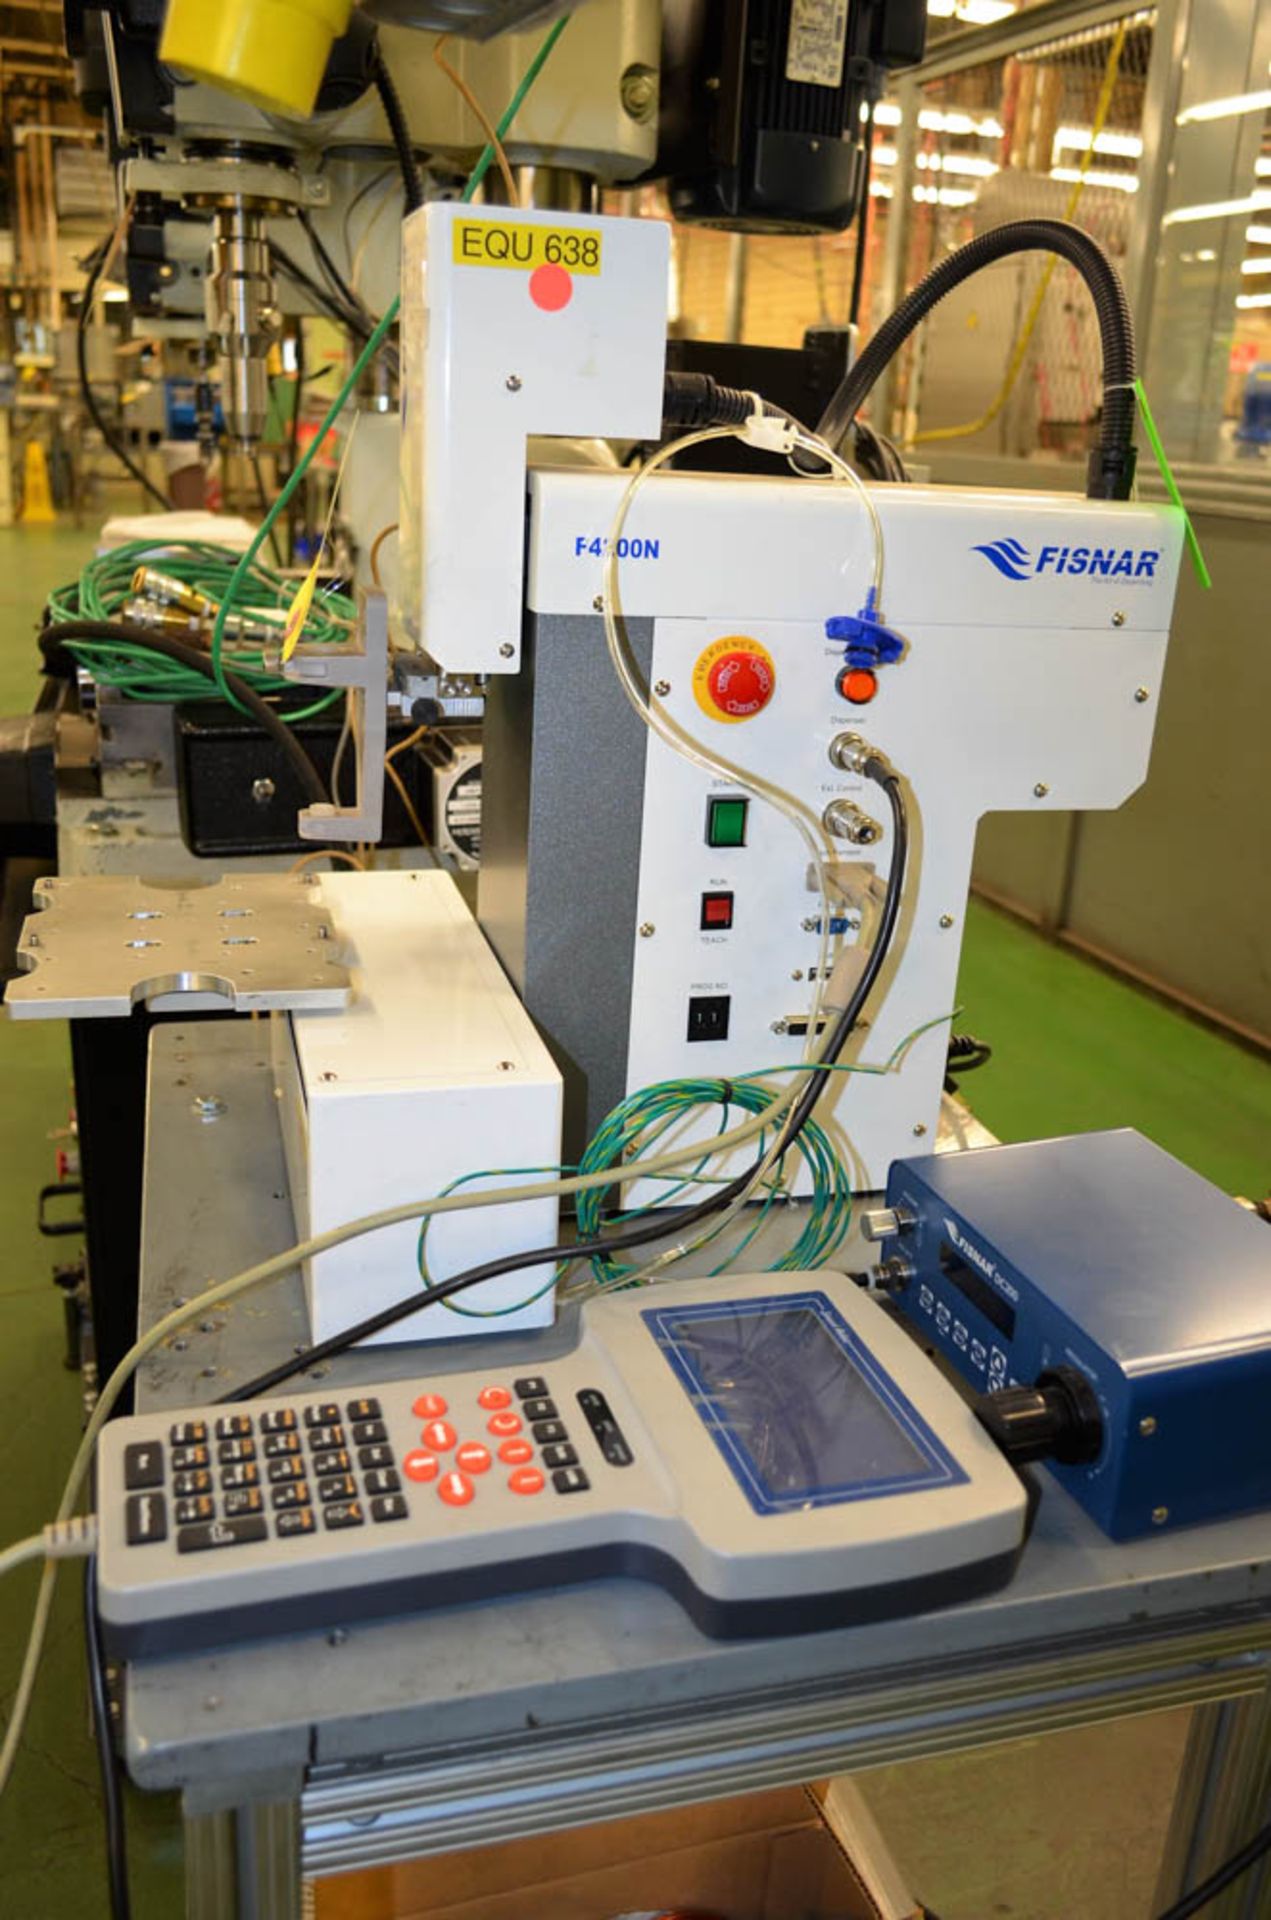 FISNAR MDL. F4200N AUTOMATIC SOLDER DISPENSING UNIT, WITH FISNAR CONTROLLER, PENDANT CONTROLS - Image 2 of 3